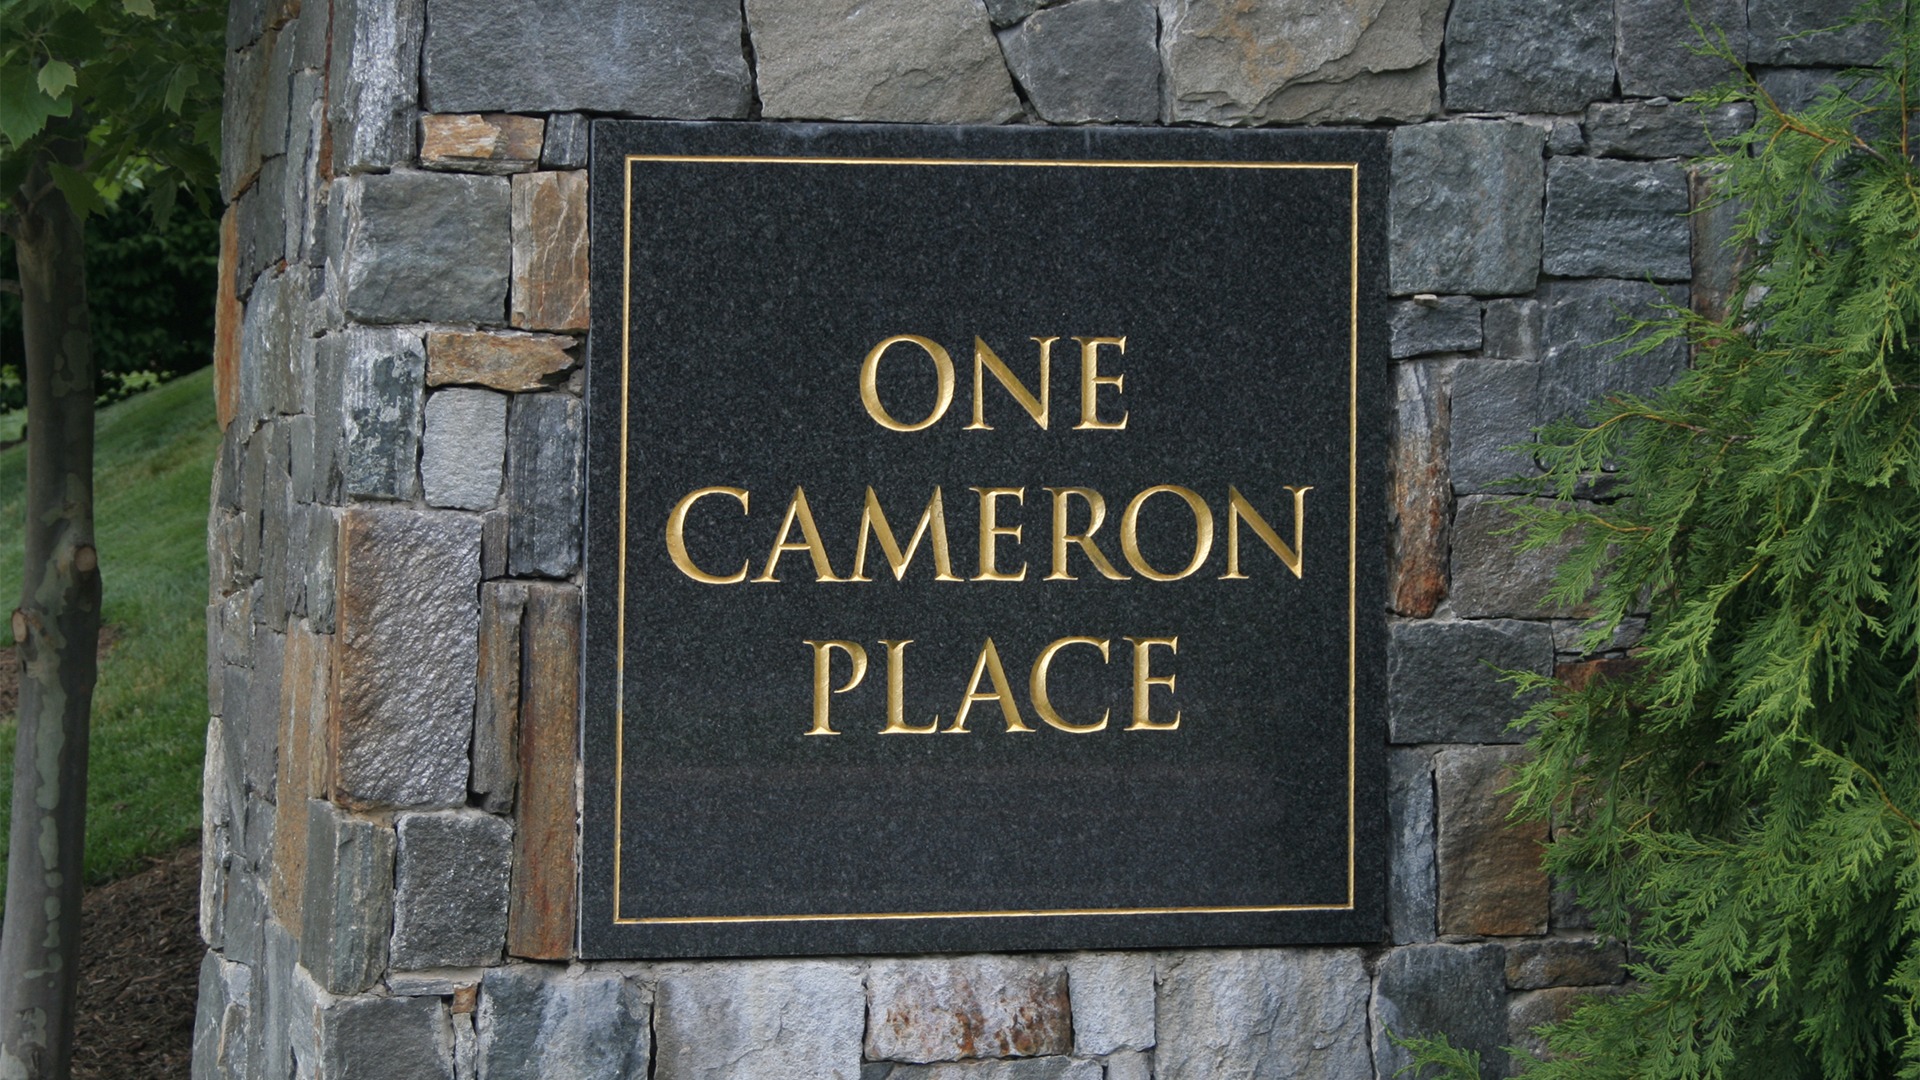 The plaque on the entrance feature at One Cameron Place.